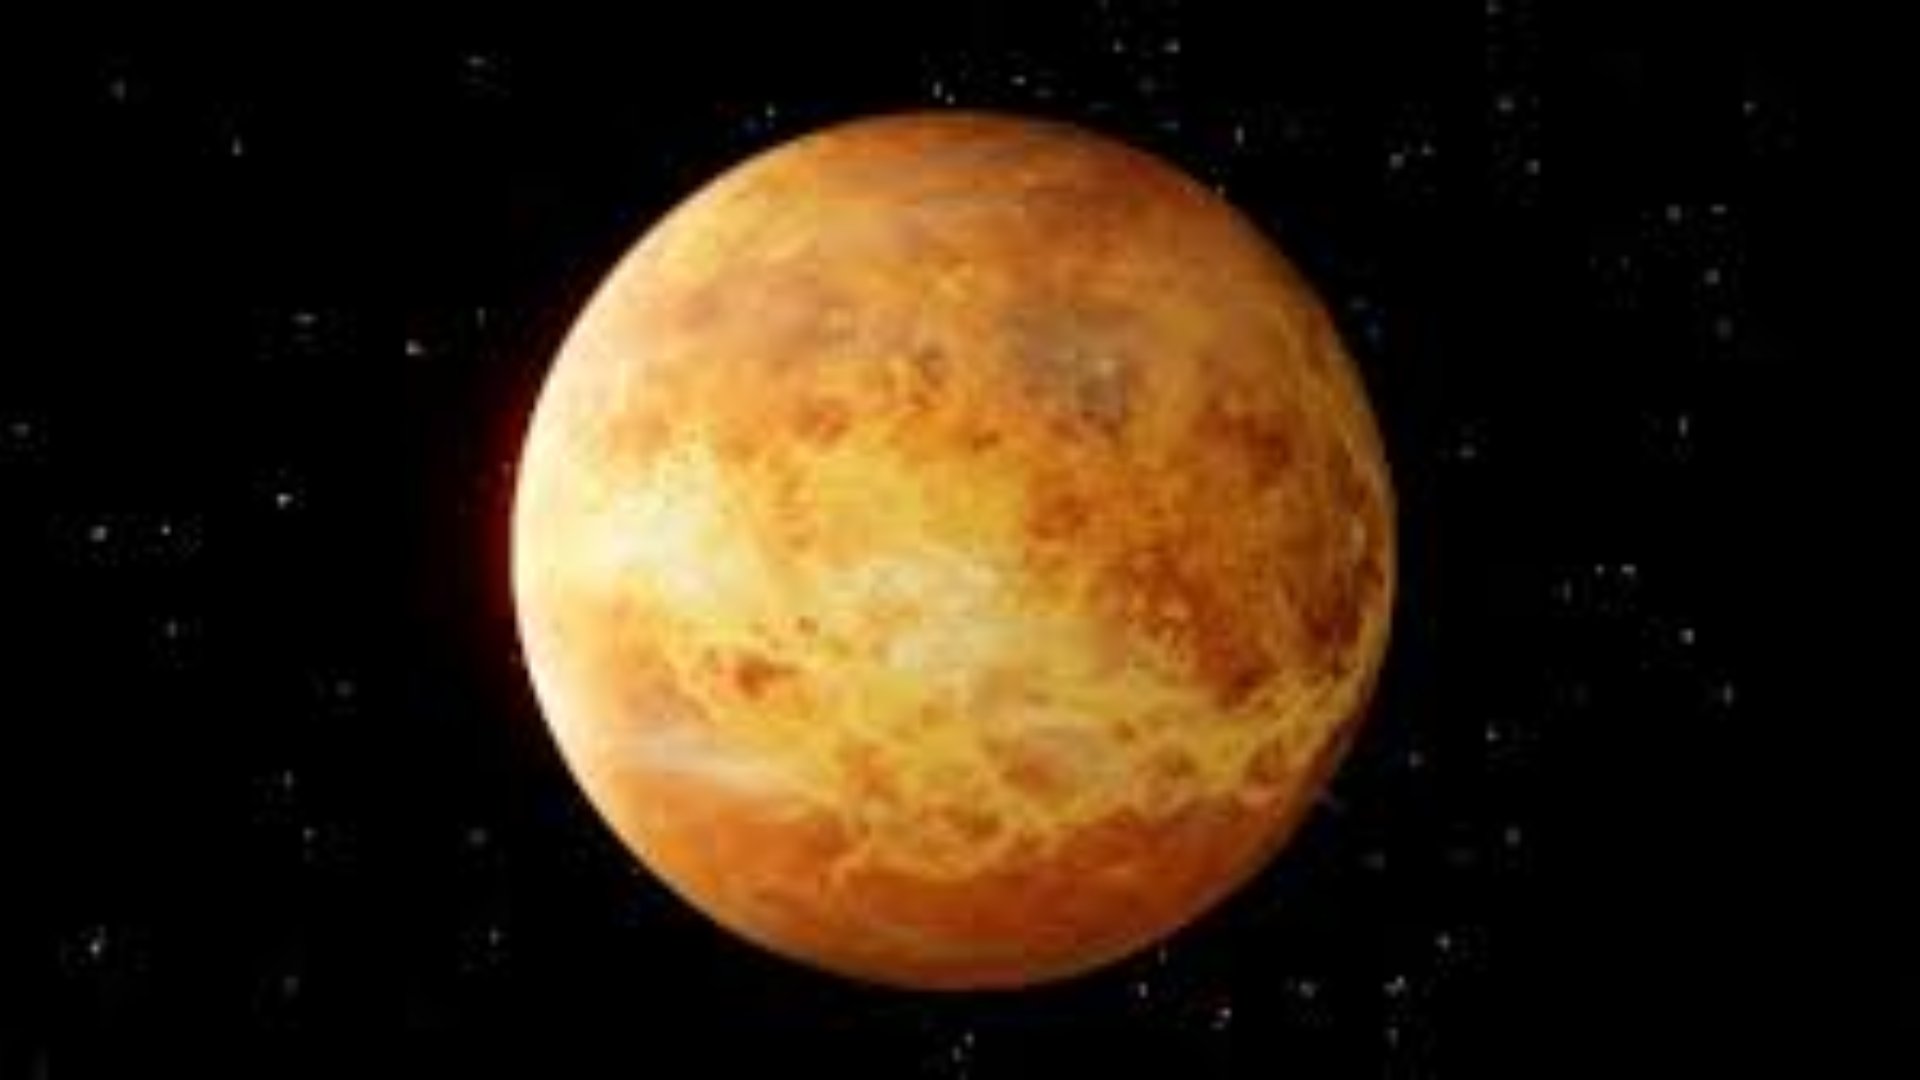 Life In The Planet Venus: Why Scientists Think Life May Have Thrived On The ‘Hell Planet’ Venus